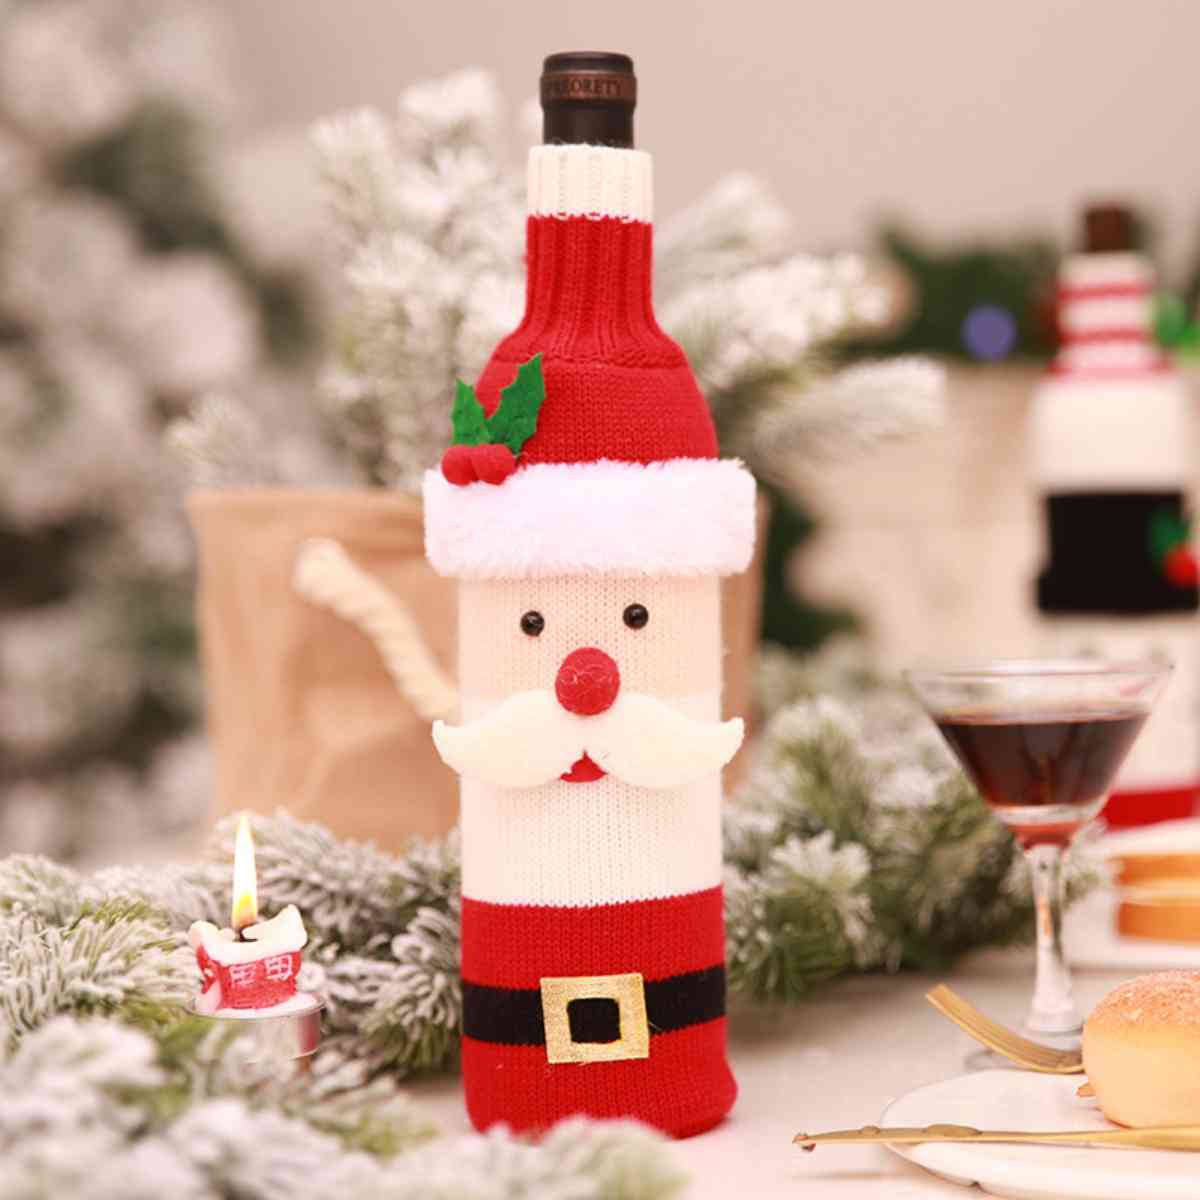 Christmas Knit Wine Bottle Cover in Snowman or Santa Theme